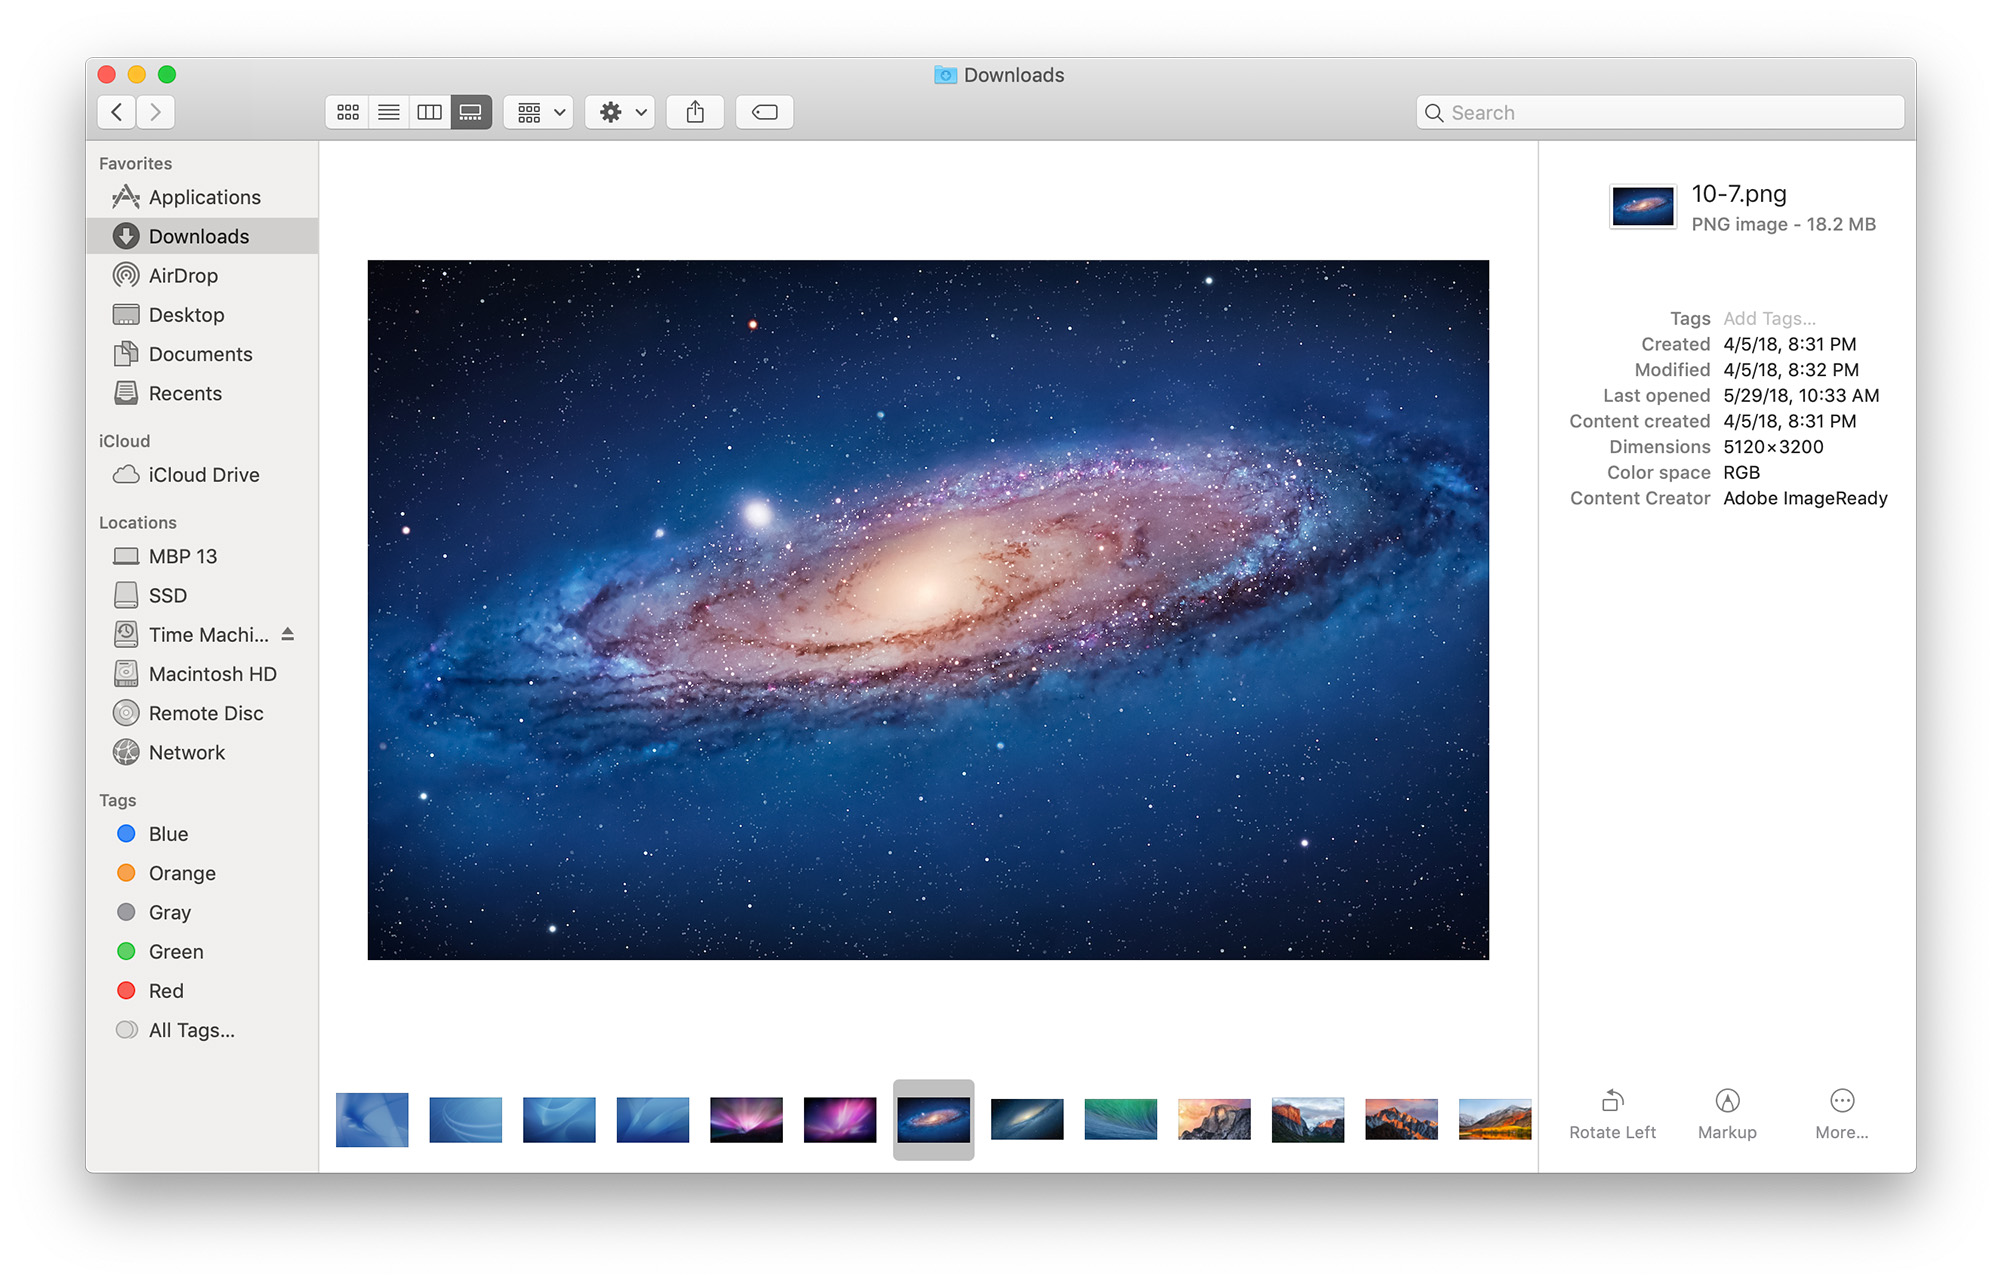 Gallery View in macOS Mojave